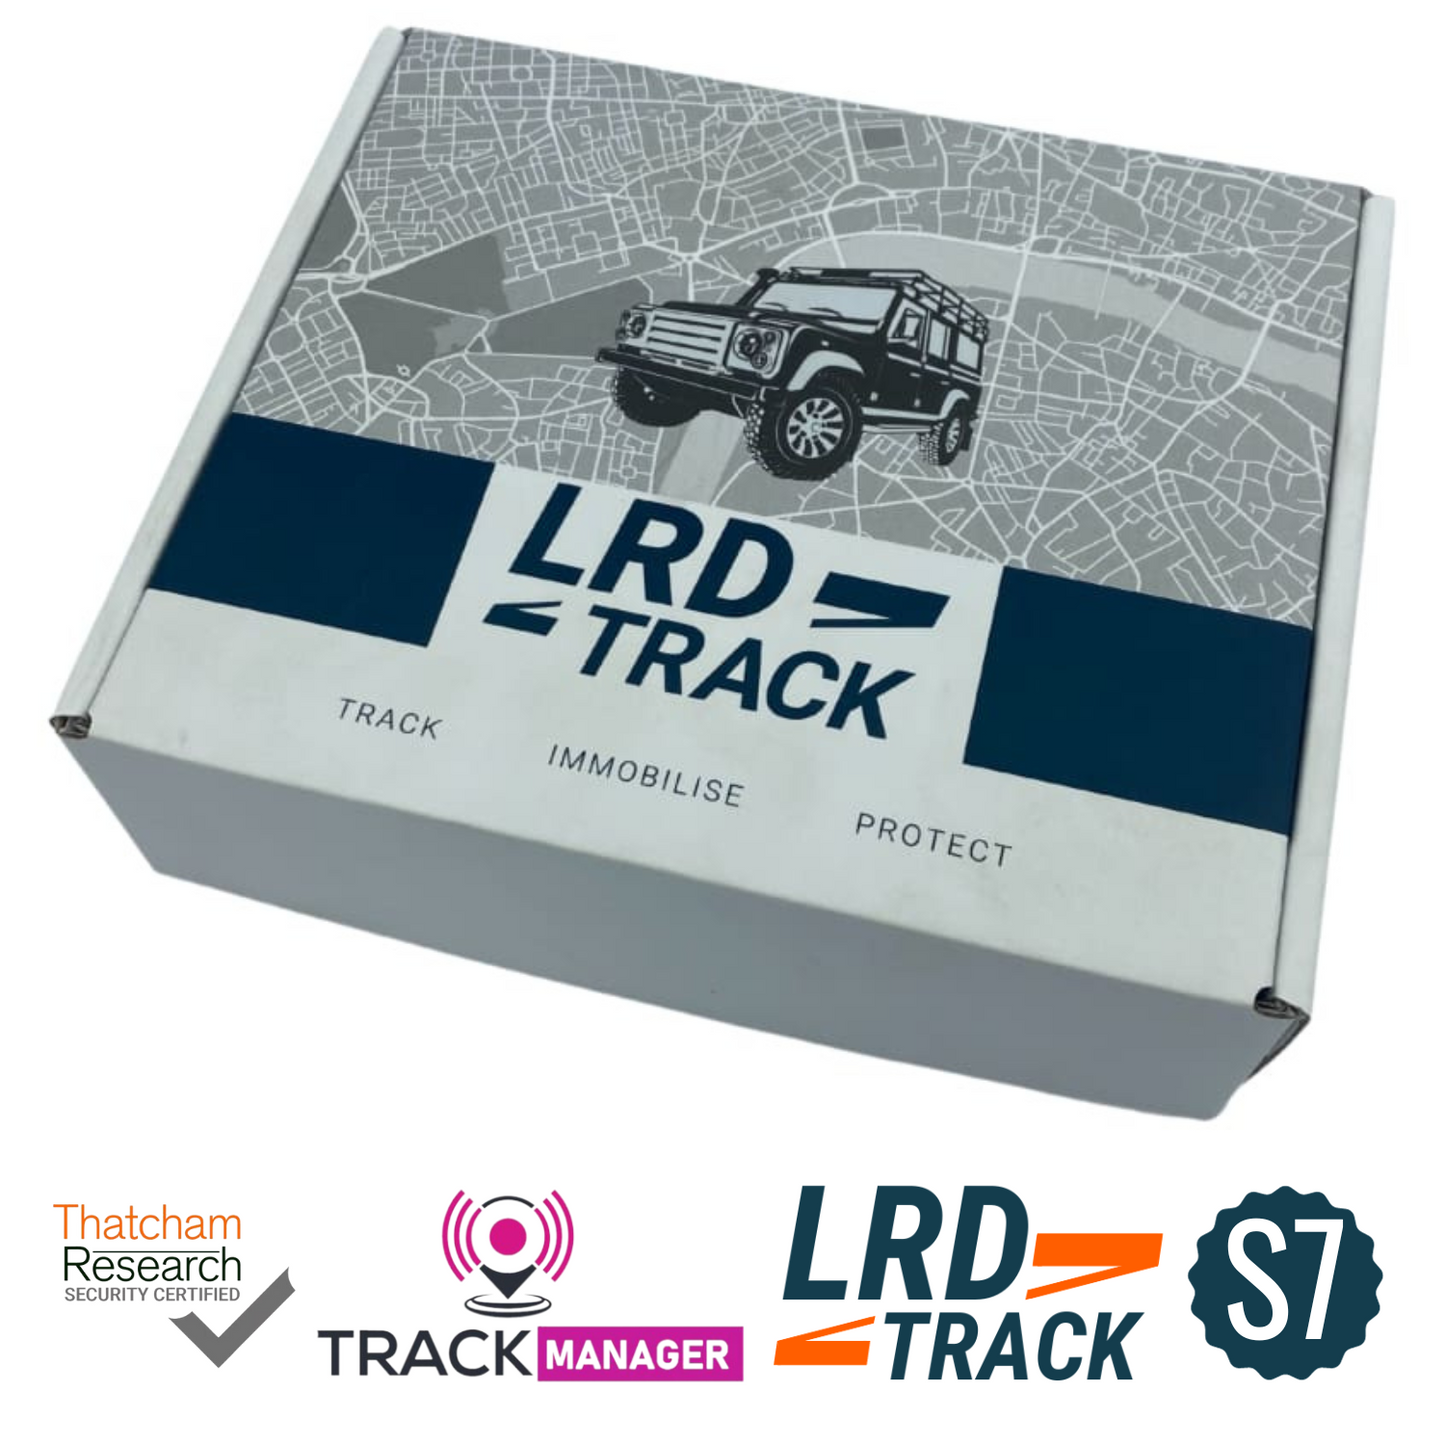 ULTRA Track Manager - S5 plus - Discovery Tracker and Immobiliser - LRD Track